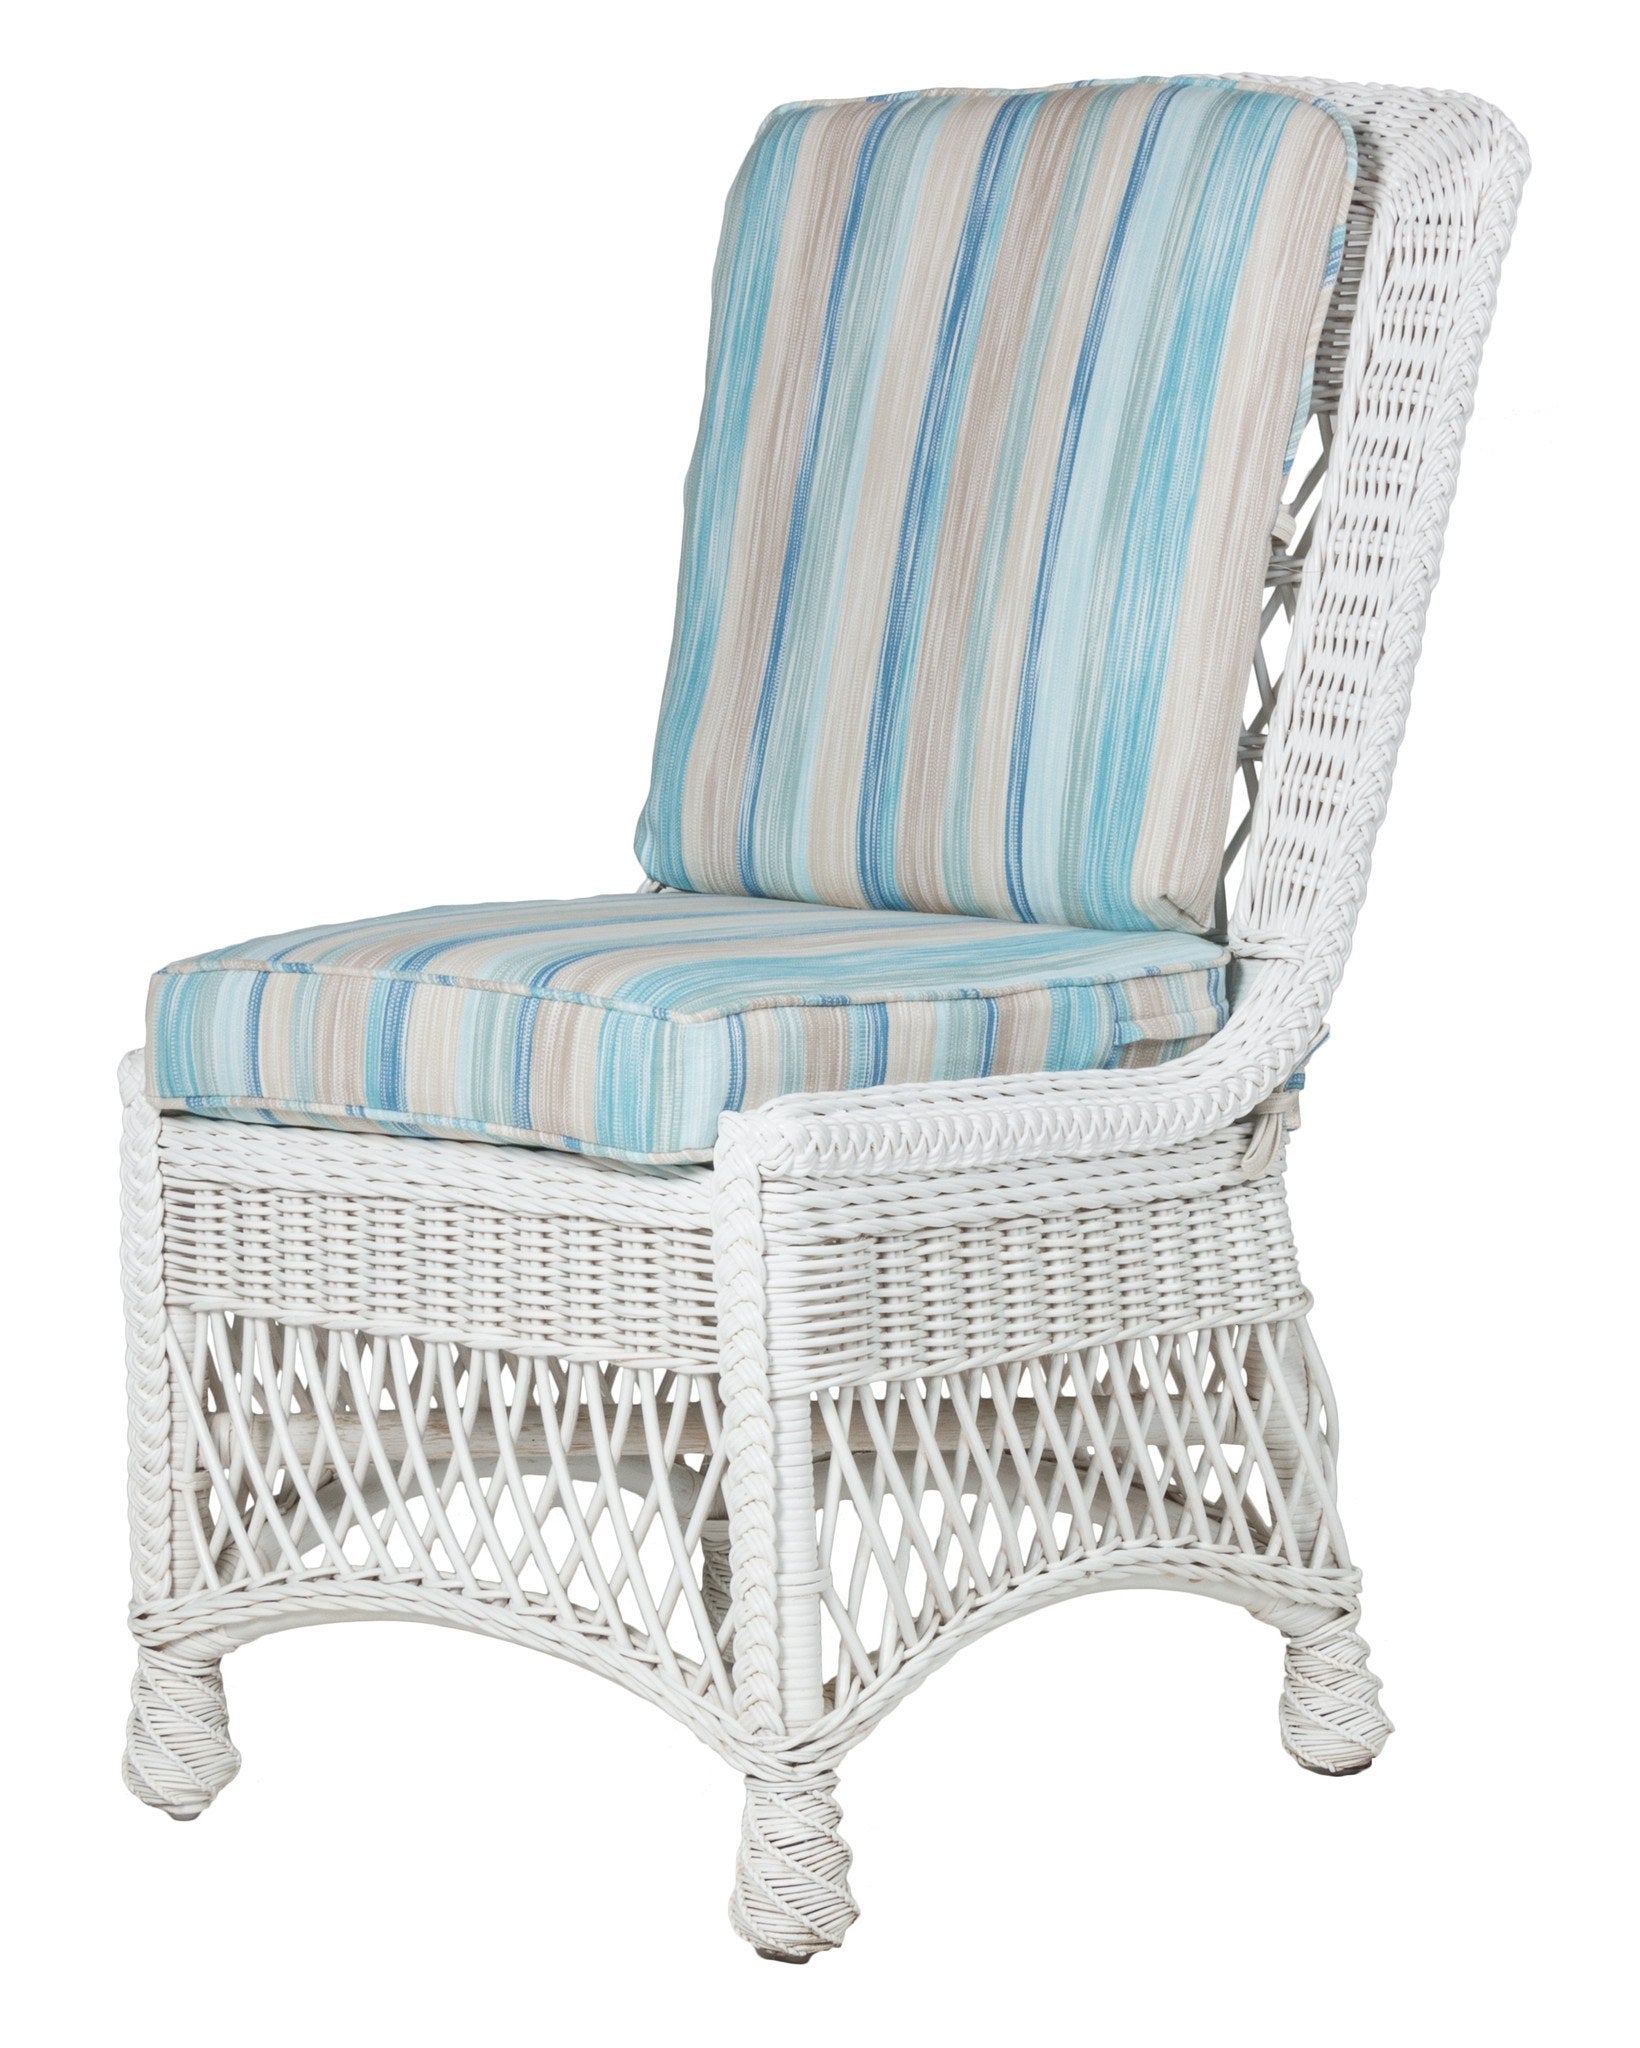 Designer Wicker & Rattan By Tribor Rockport Dining Side Chair by Designer Wicker from Tribor Dining Chair - Rattan Imports